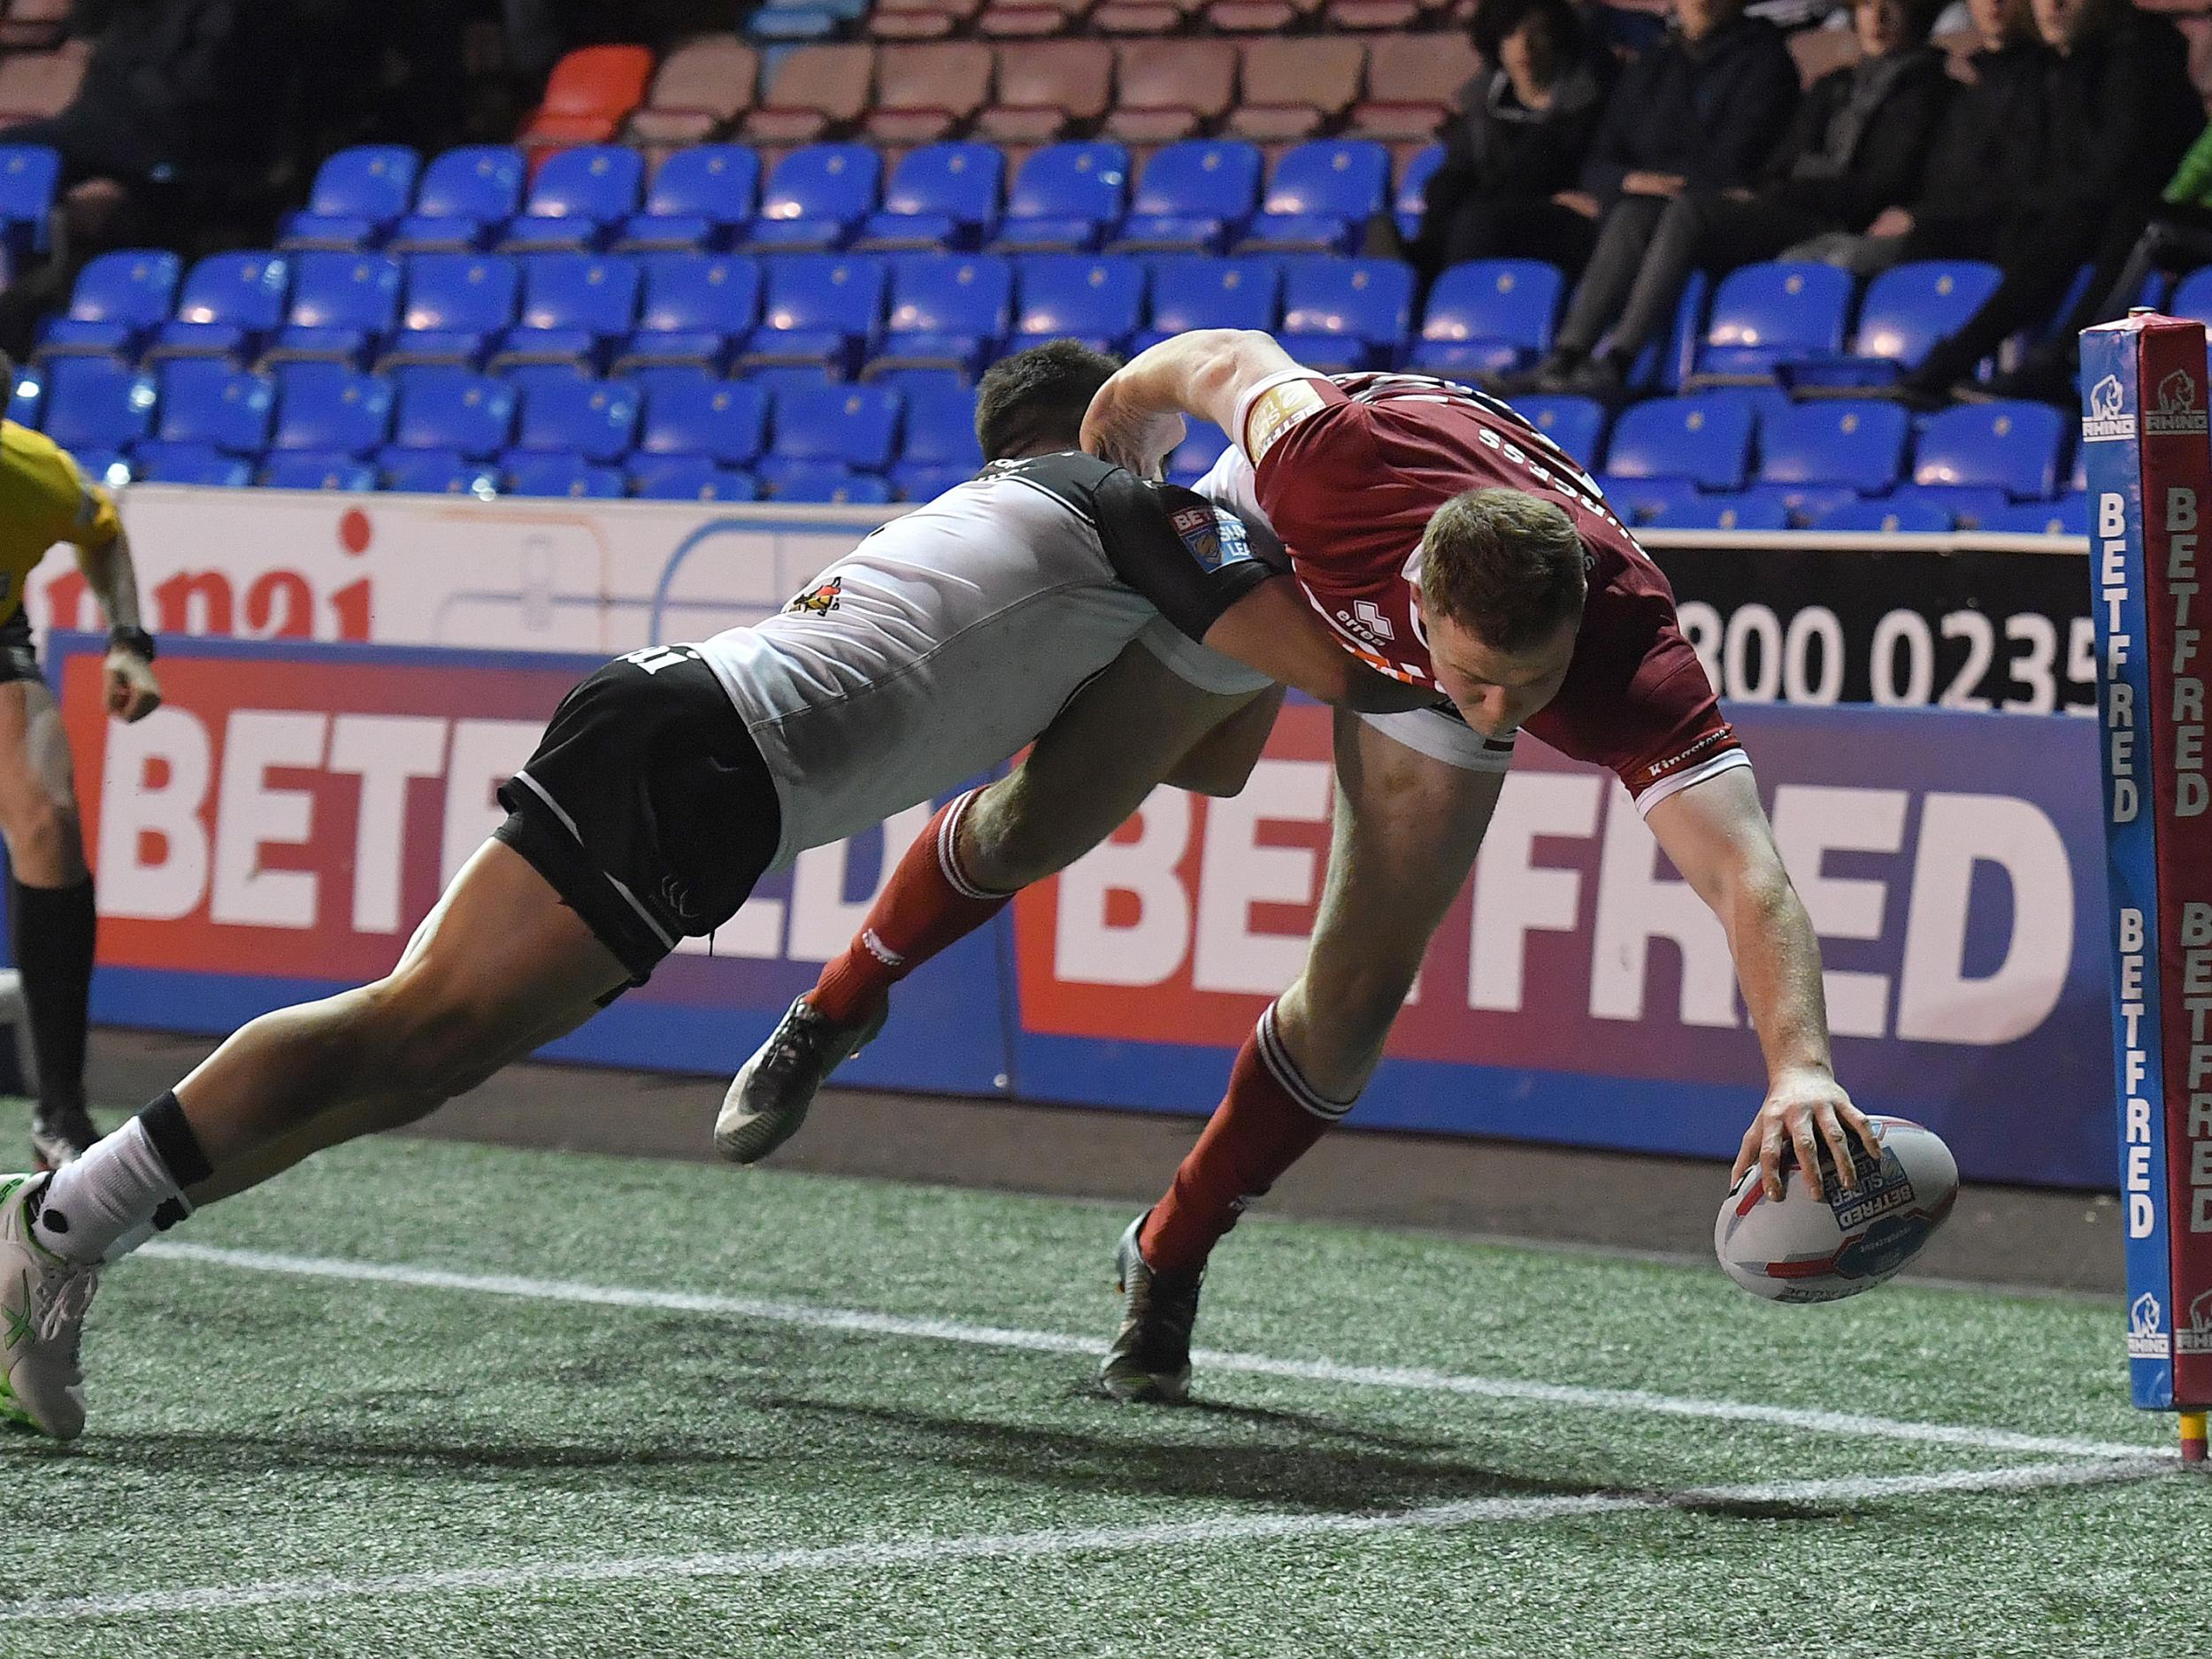 Wigan Warriors' Joe Burgess scores his sides 3rd try